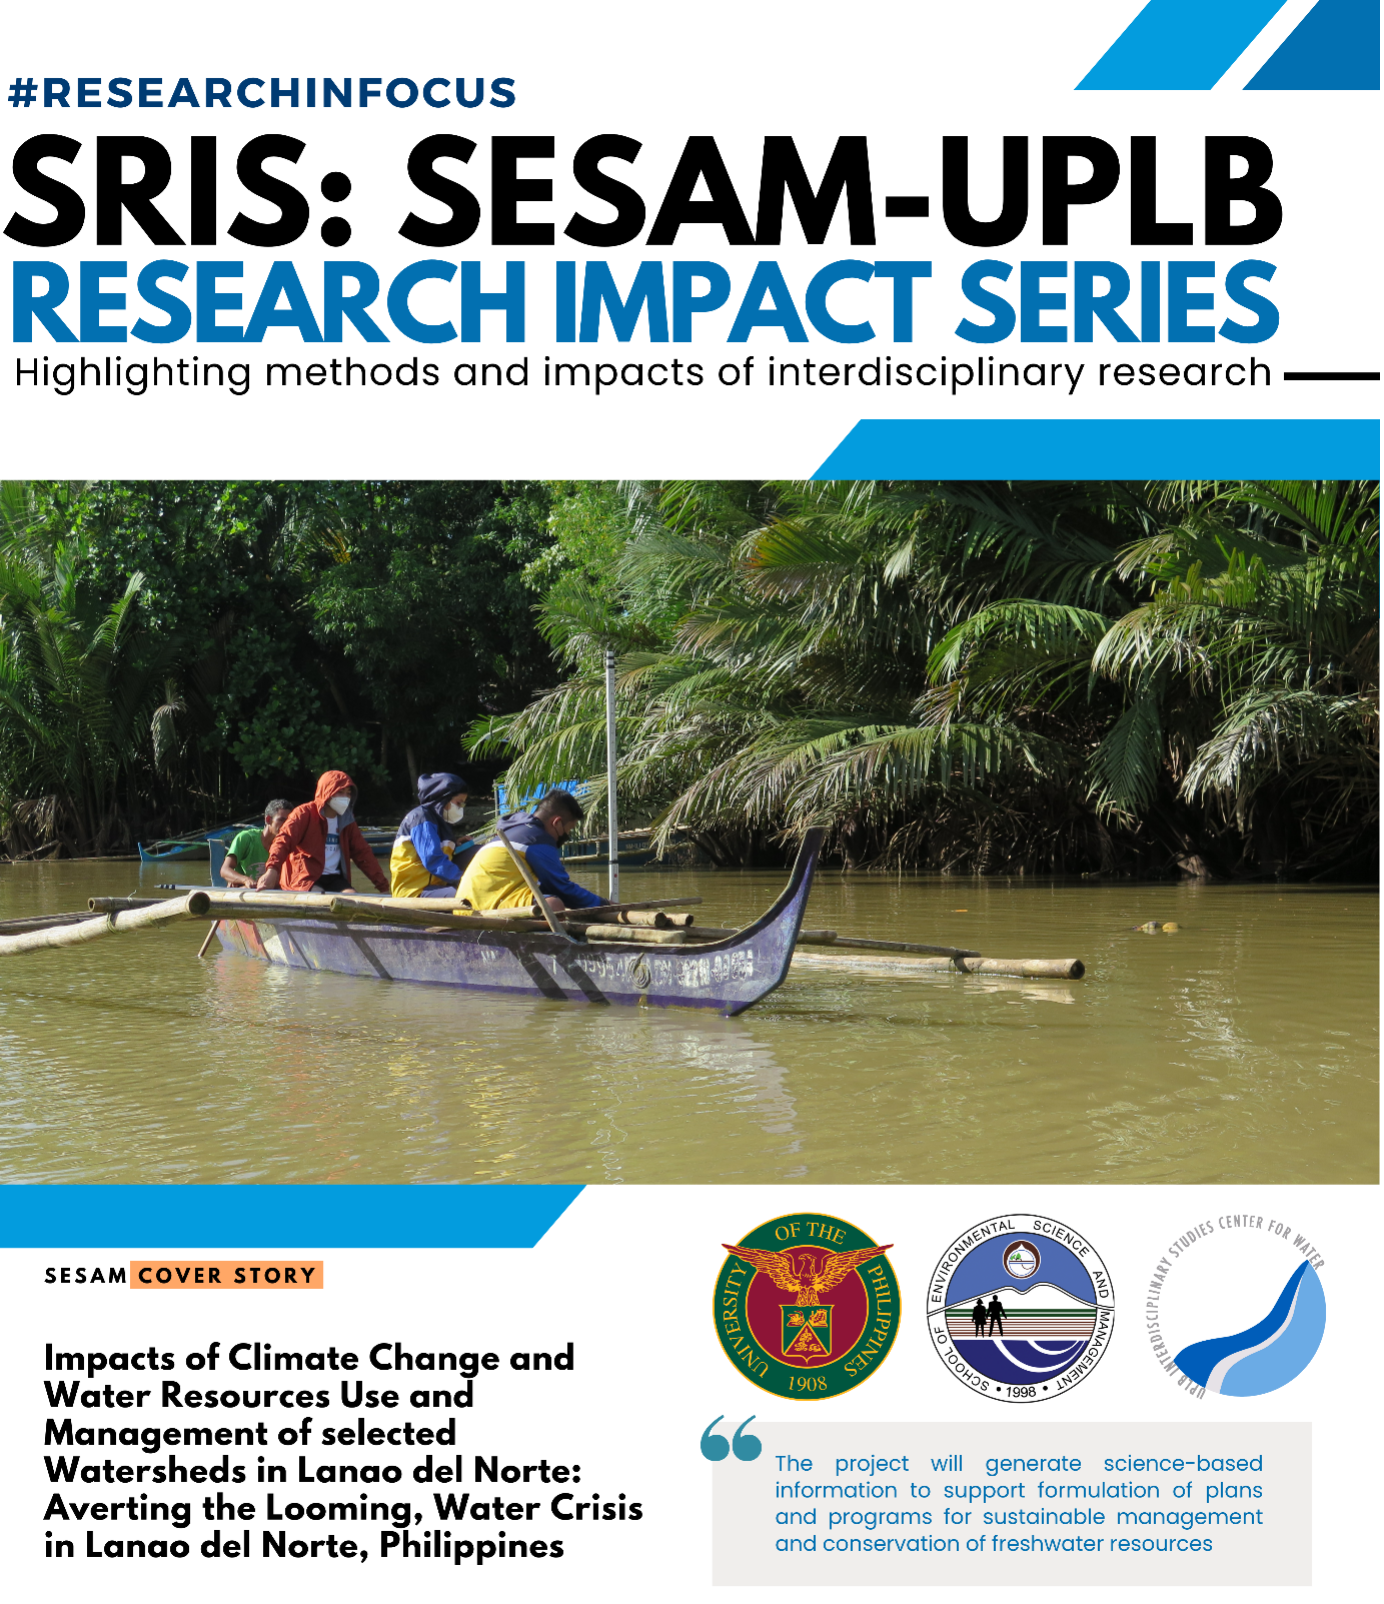 Impacts of climate change and water resources use and management of selected watersheds in Lanao del Norte: averting the looming water crisis